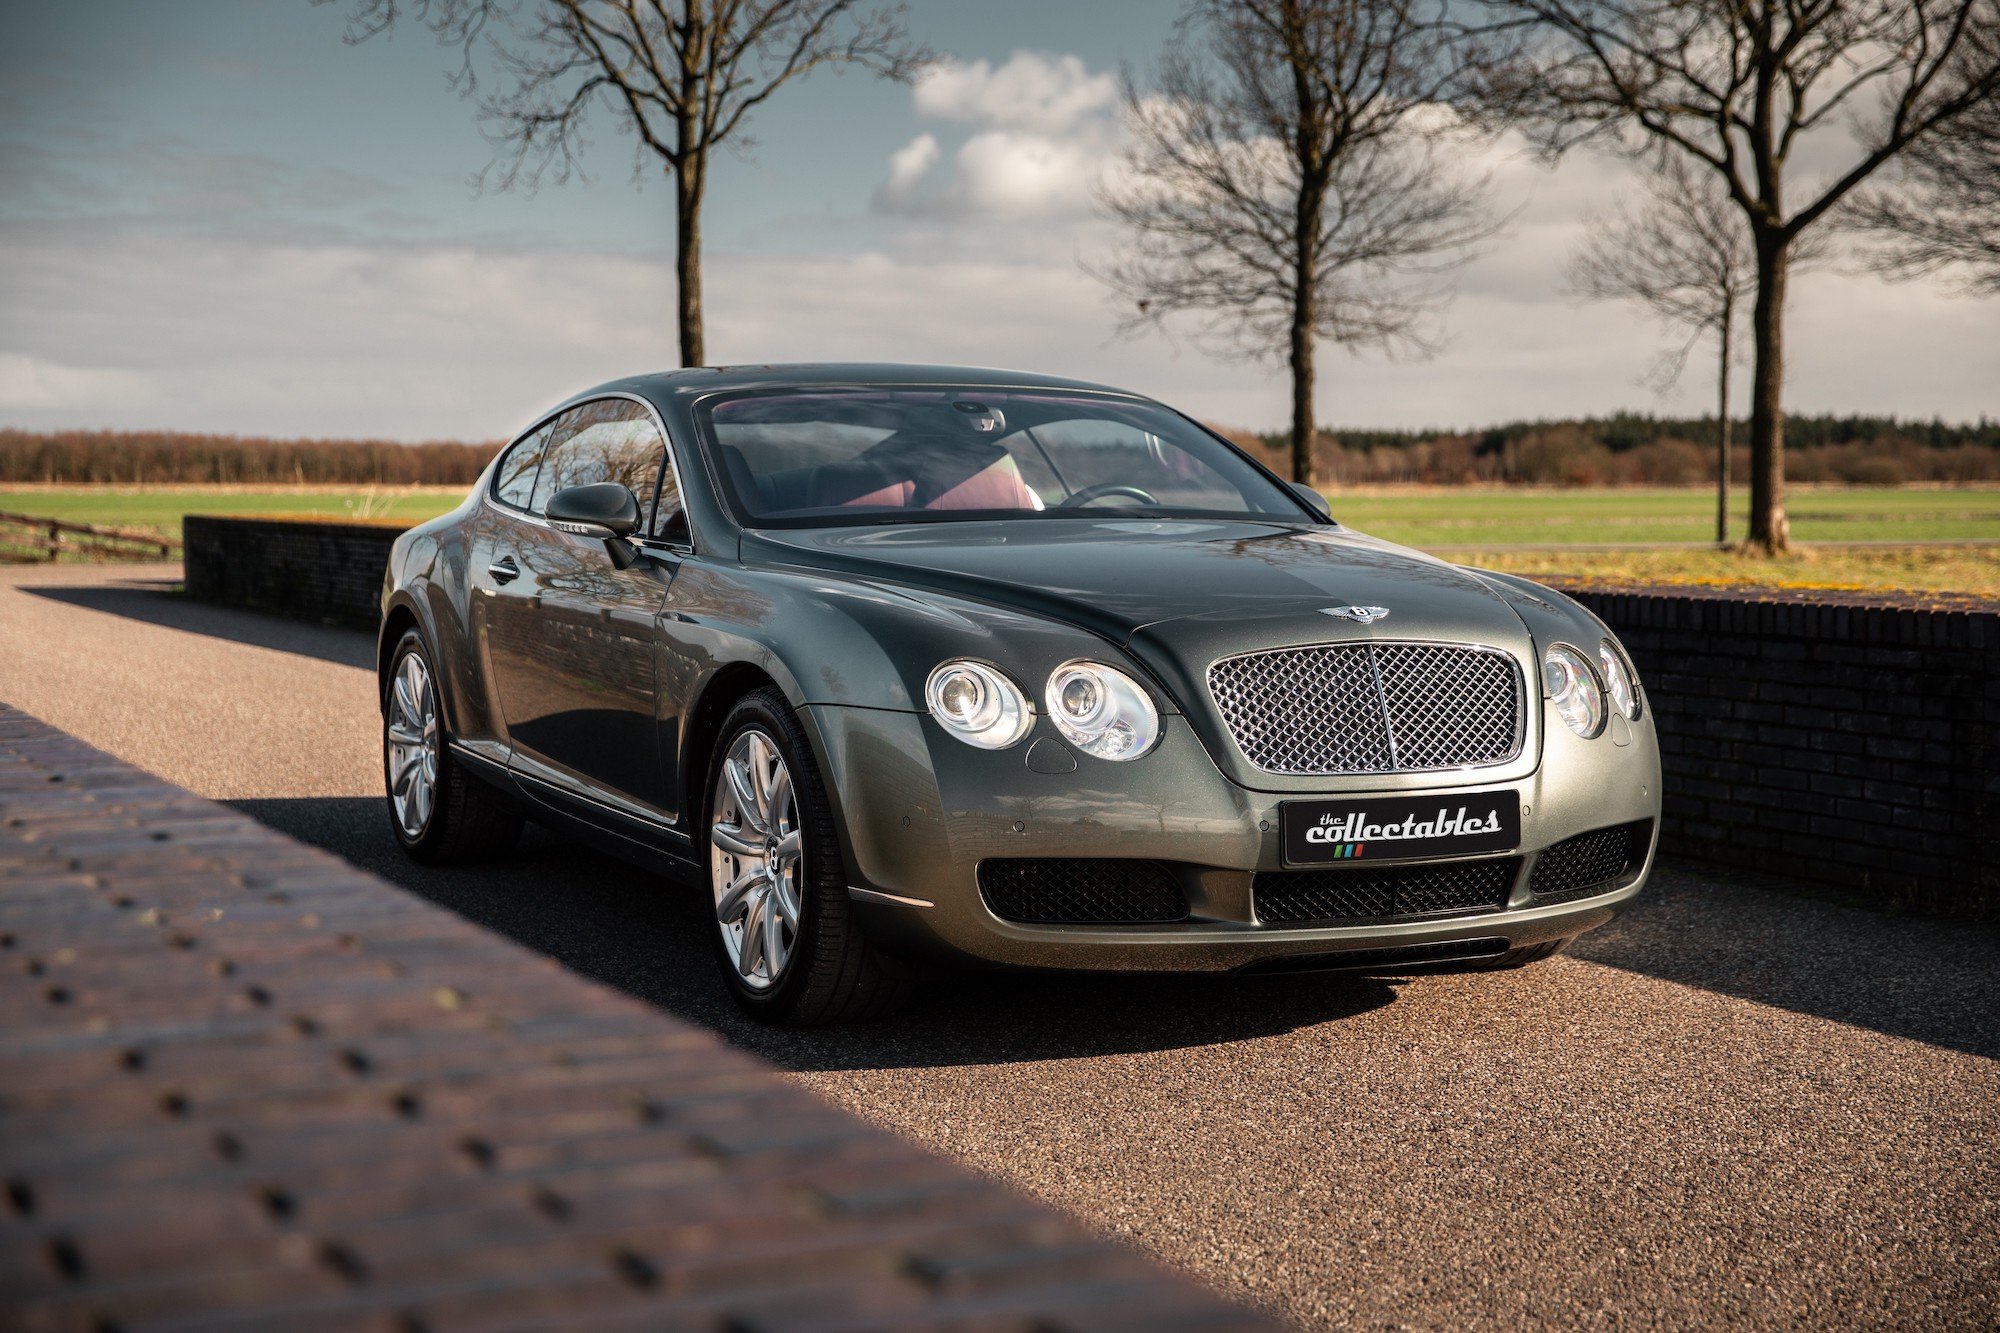 2005 Bentley Continental GT - Cypress Green - Brown leather